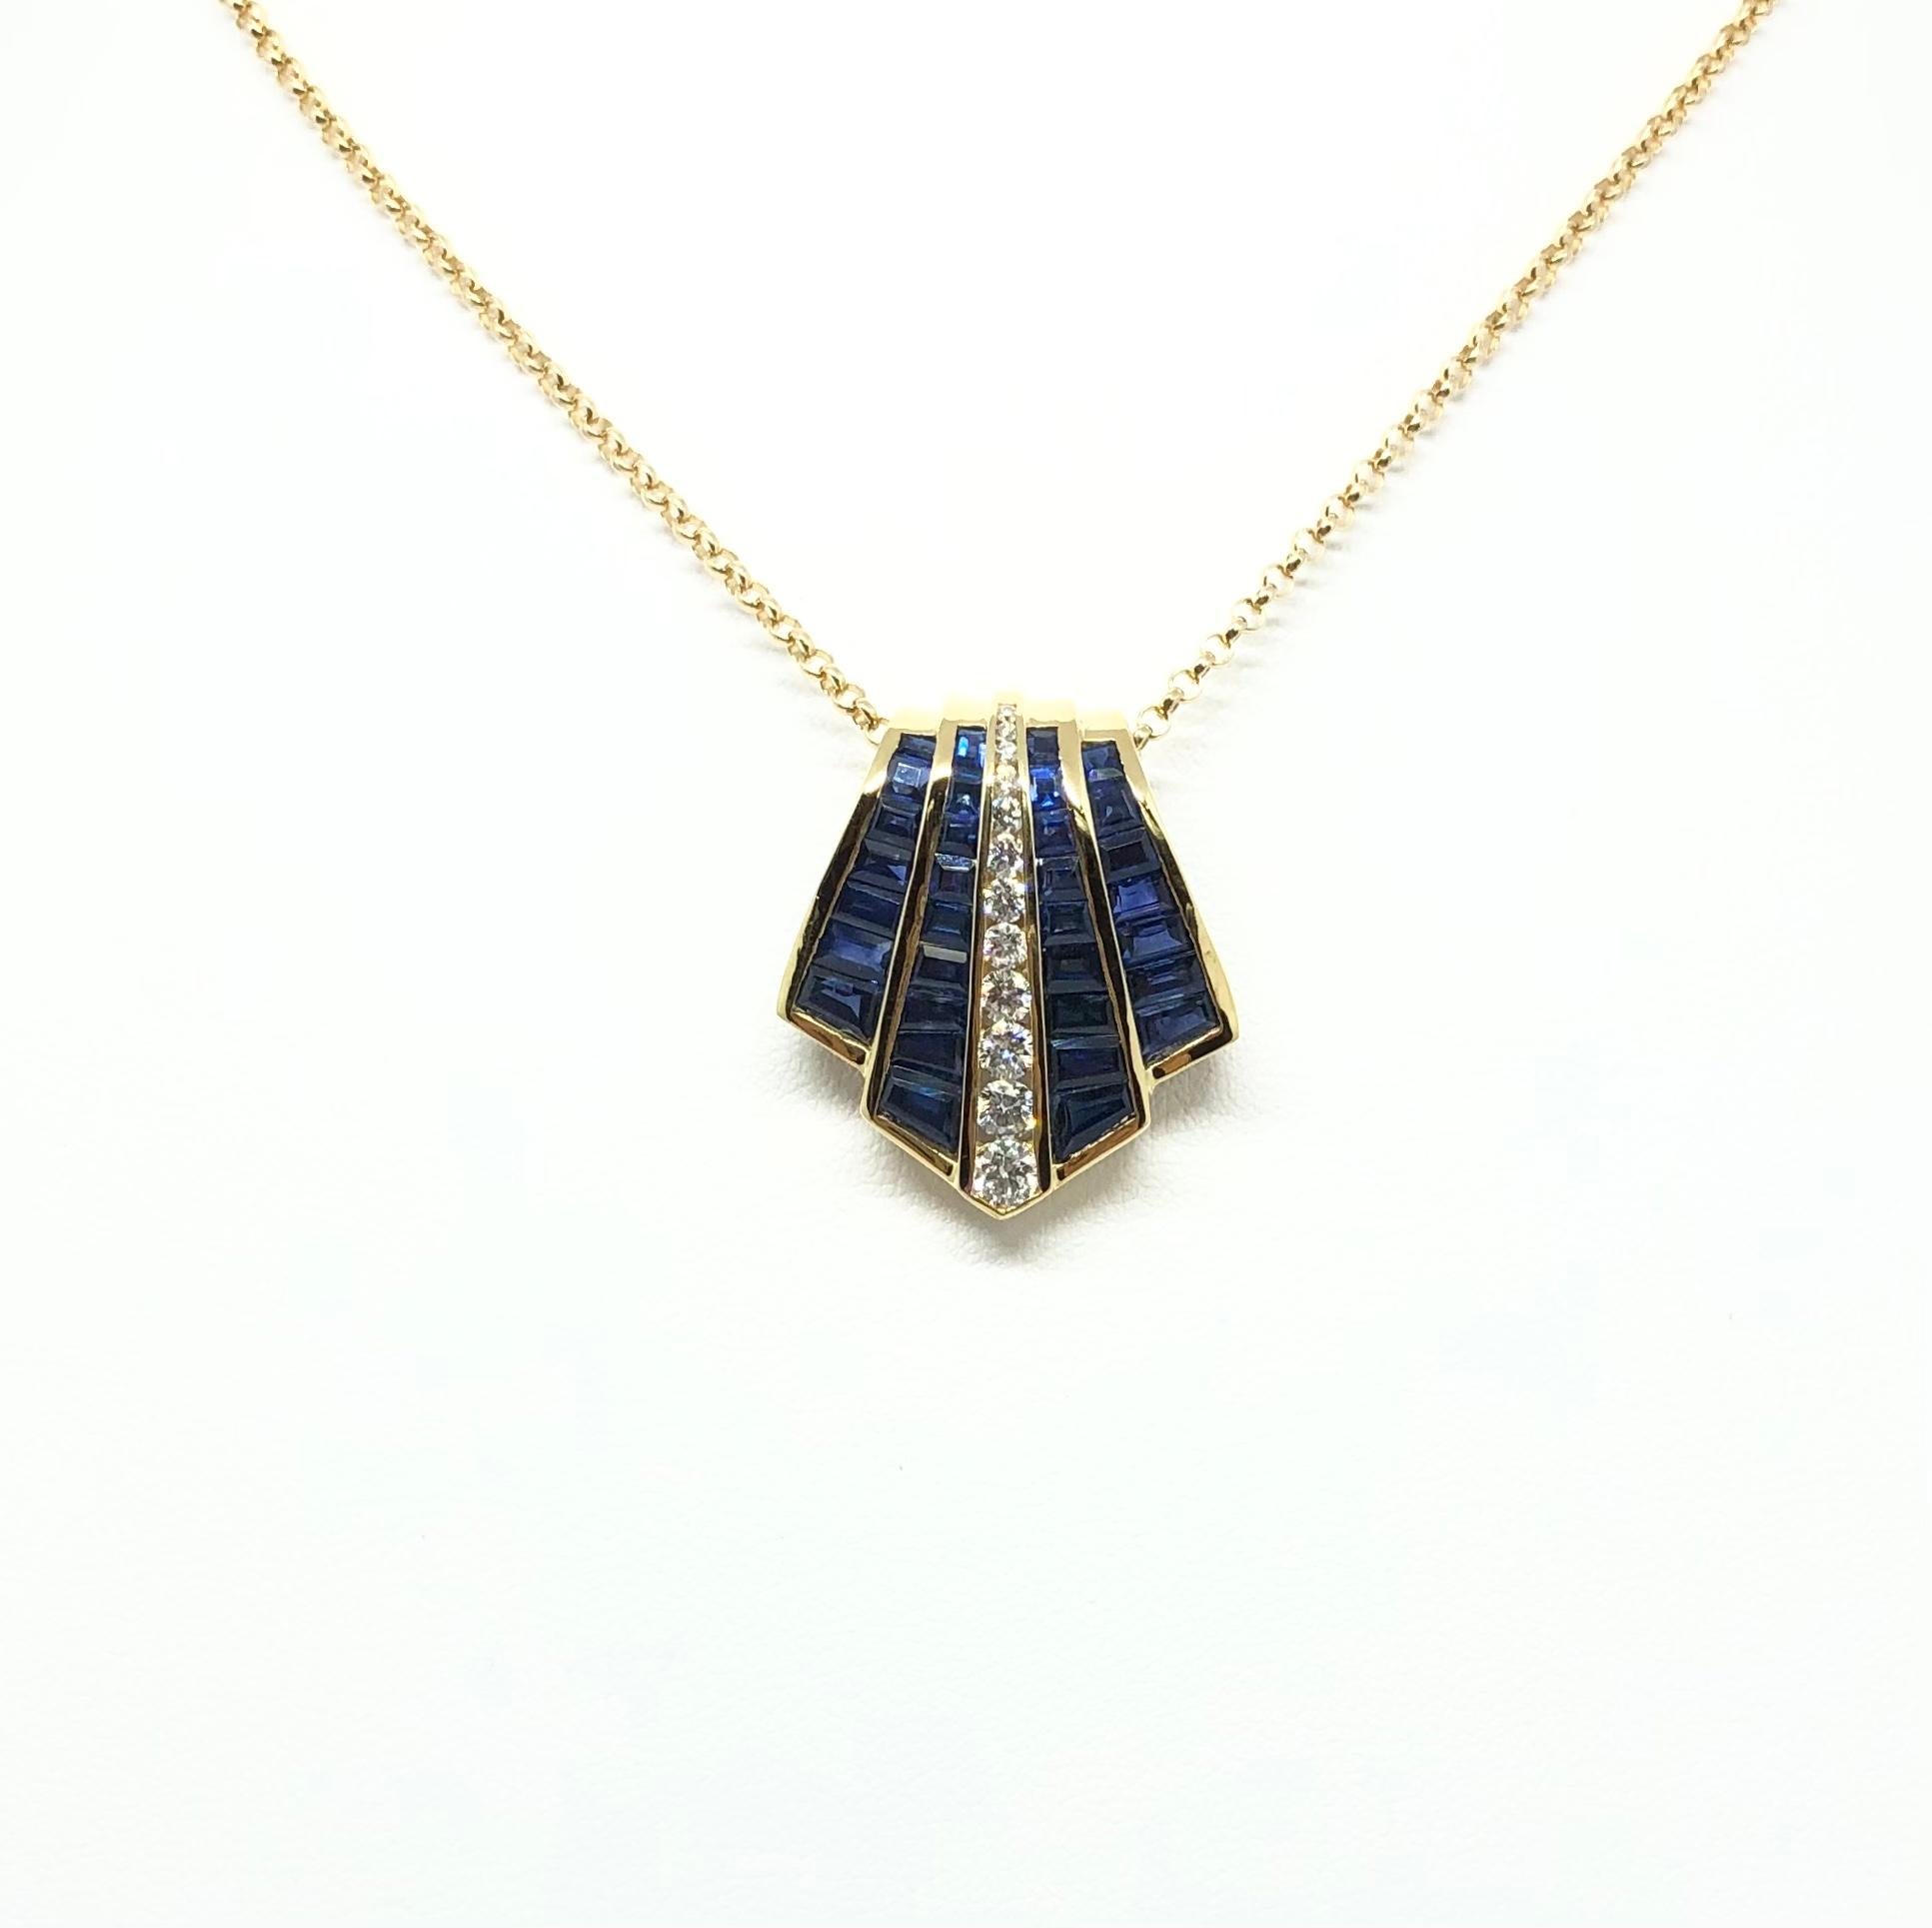 Blue Sapphire 6.28 carats with Diamond 0.41 carat Pendant set in 18 Karat Gold Settings
(chain not included)

Width: 2.2 cm 
Length: 2.4  cm
Total Weight: 8.19 grams

